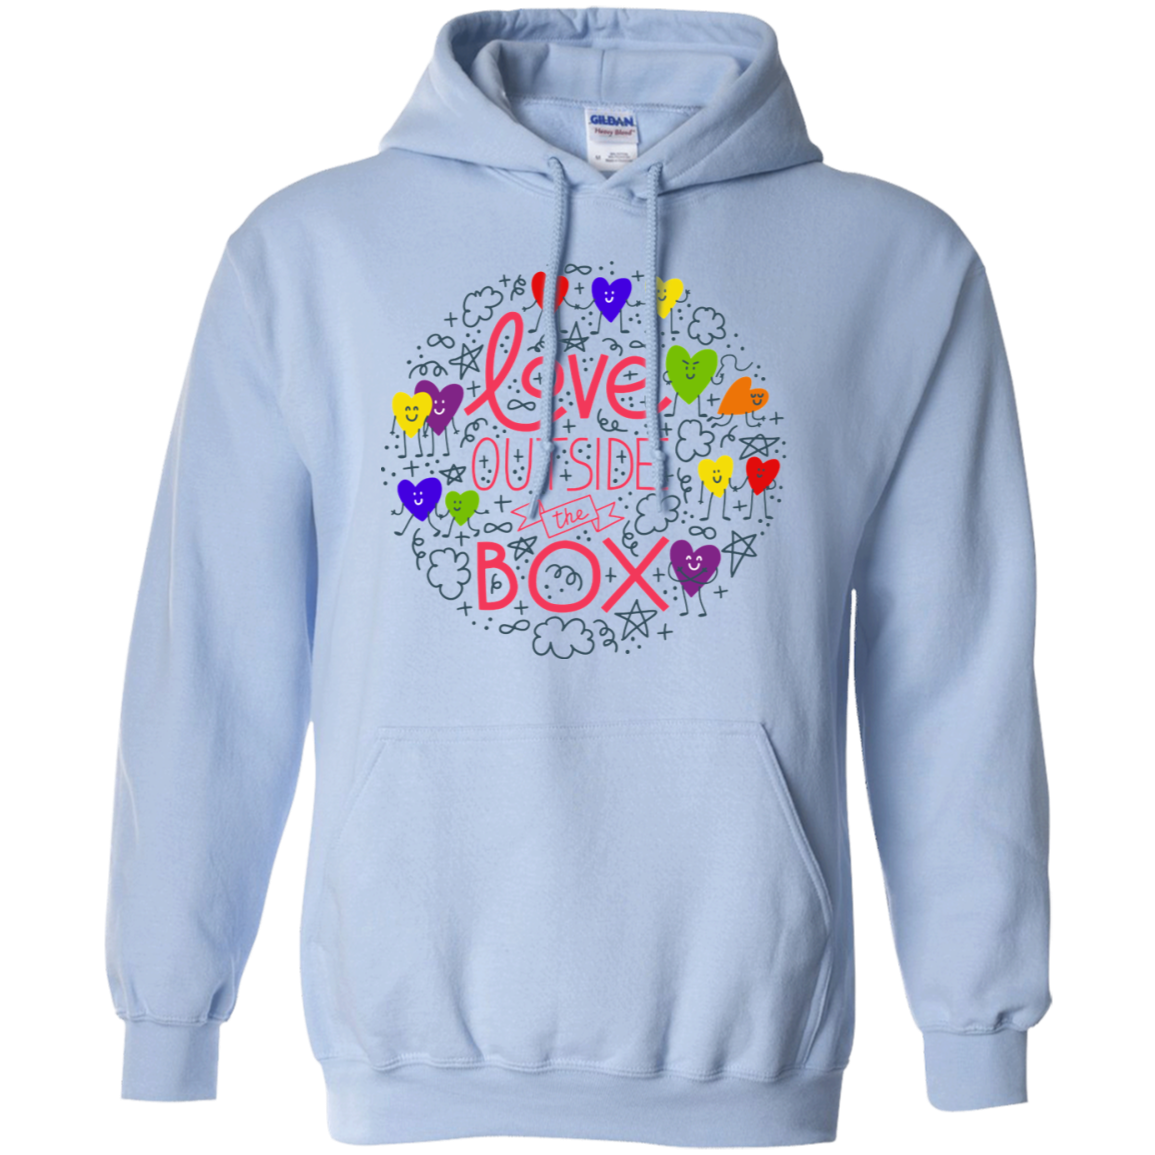 Love Outside The Box T-Shirts